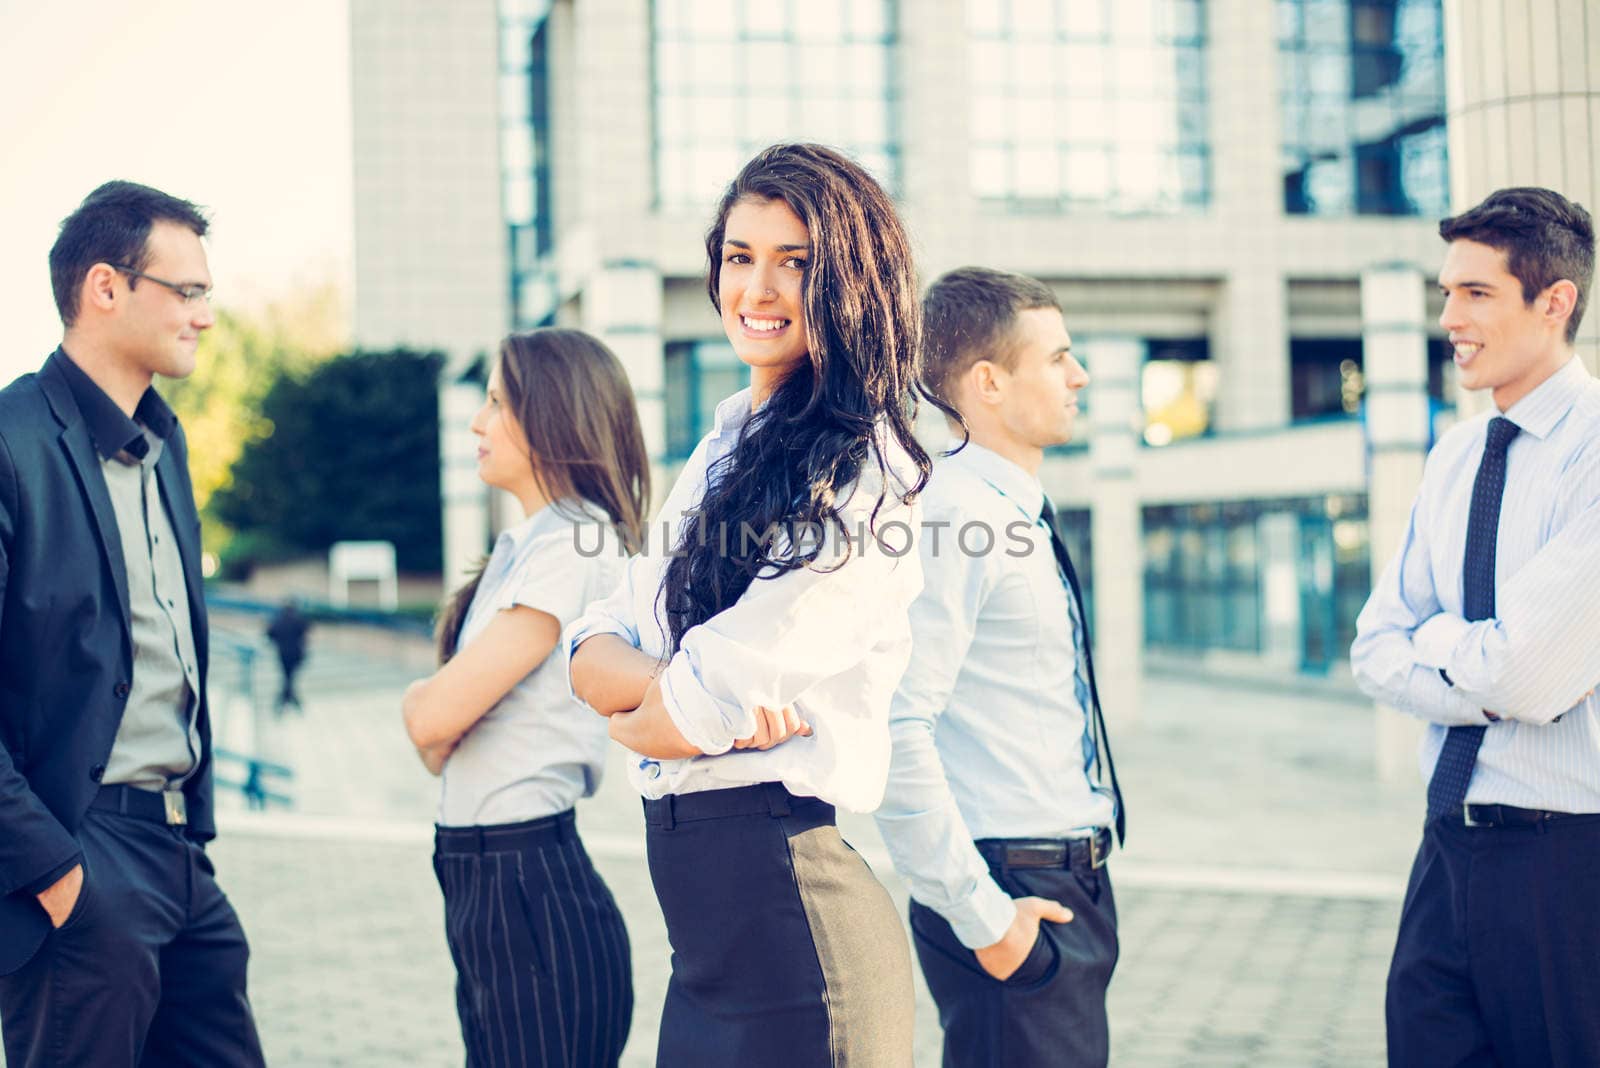 Portrait of a beautiful young businesswoman with her team young business people standing in front of office building.